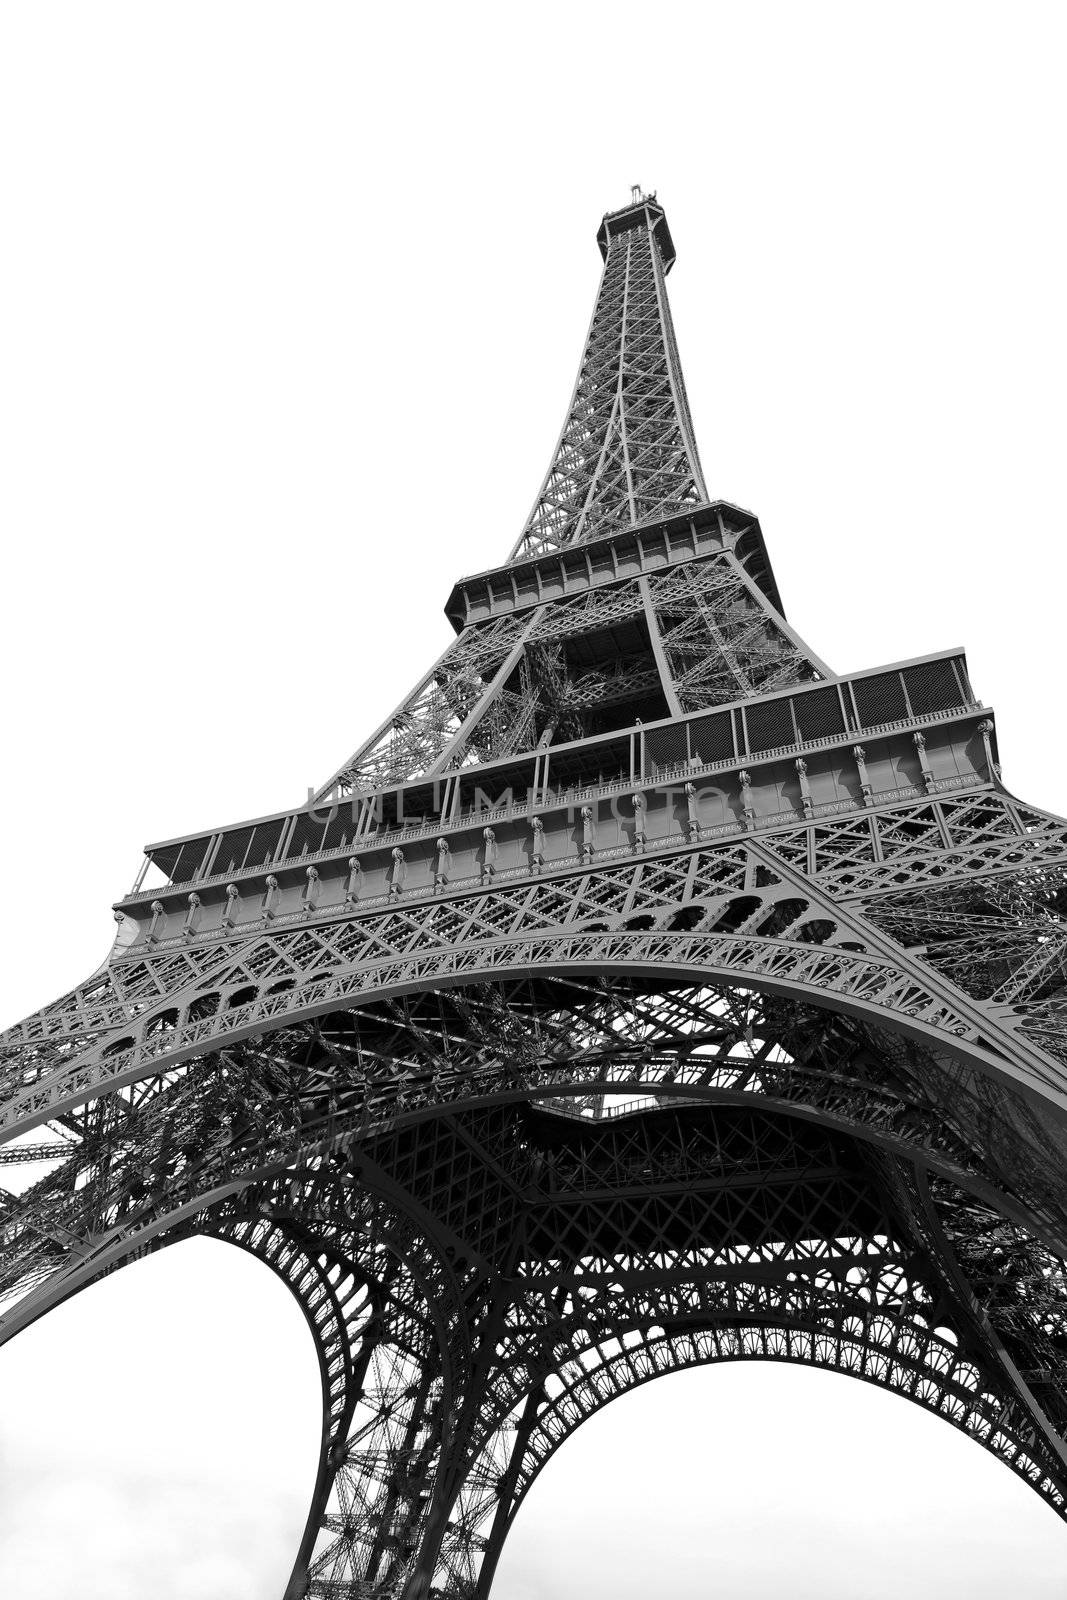 Eiffel tower on white background photographed with wide angel from below